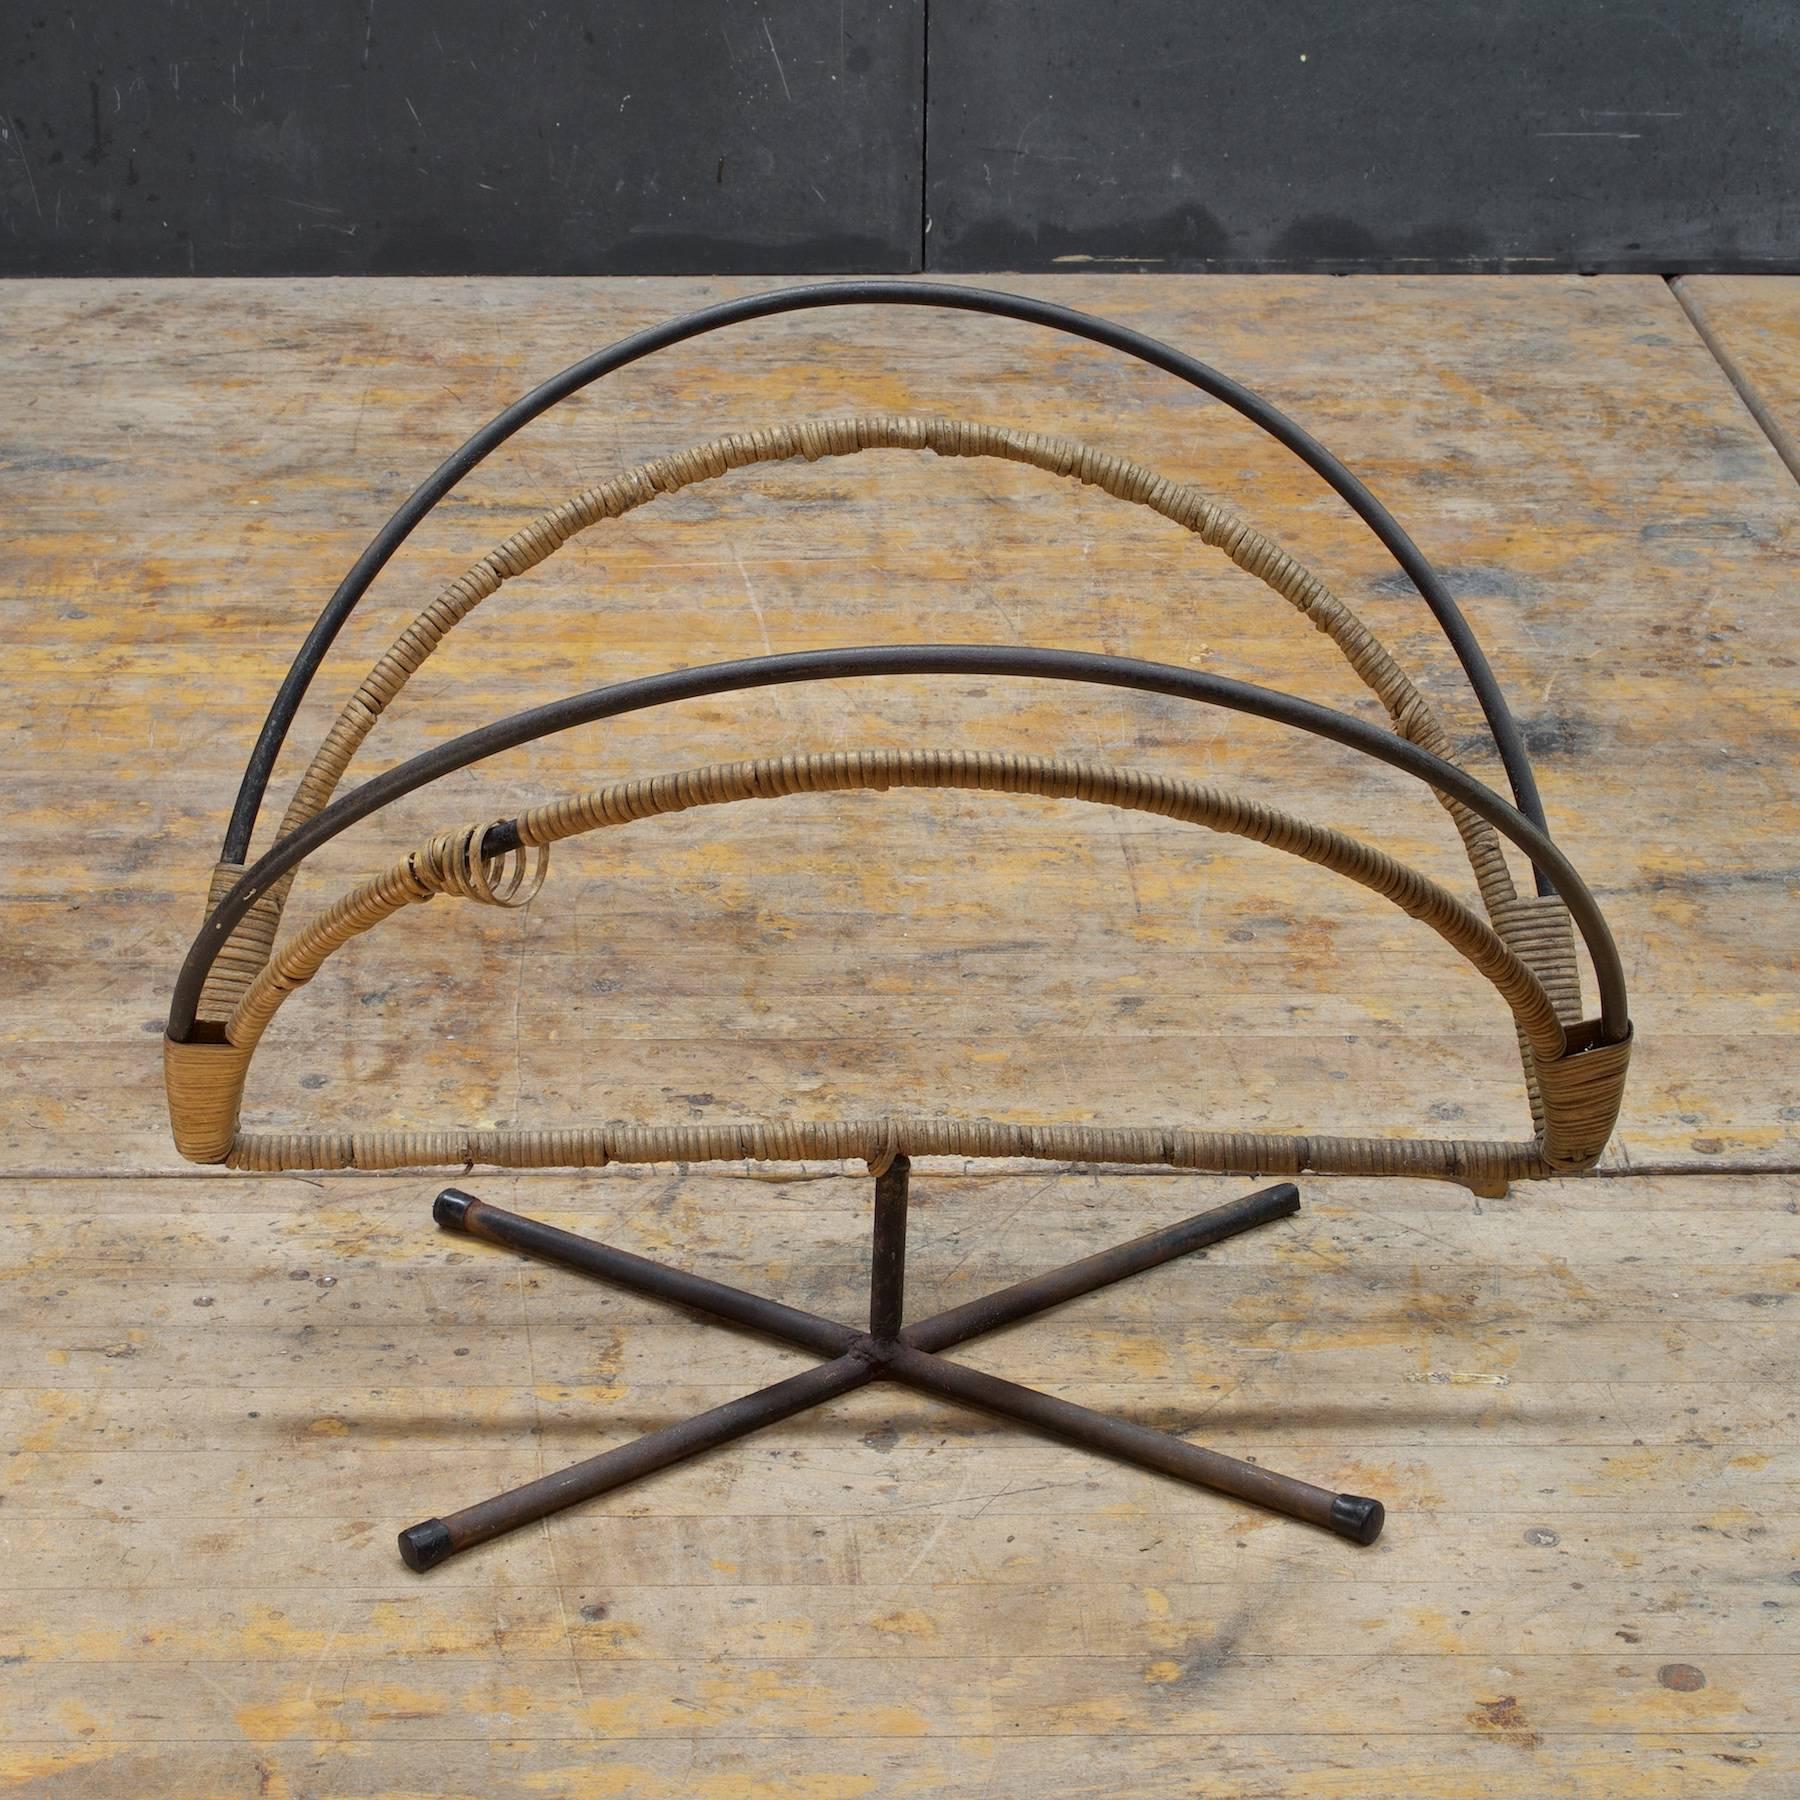 Simple, sculptural design. Presented in As-Found condition.